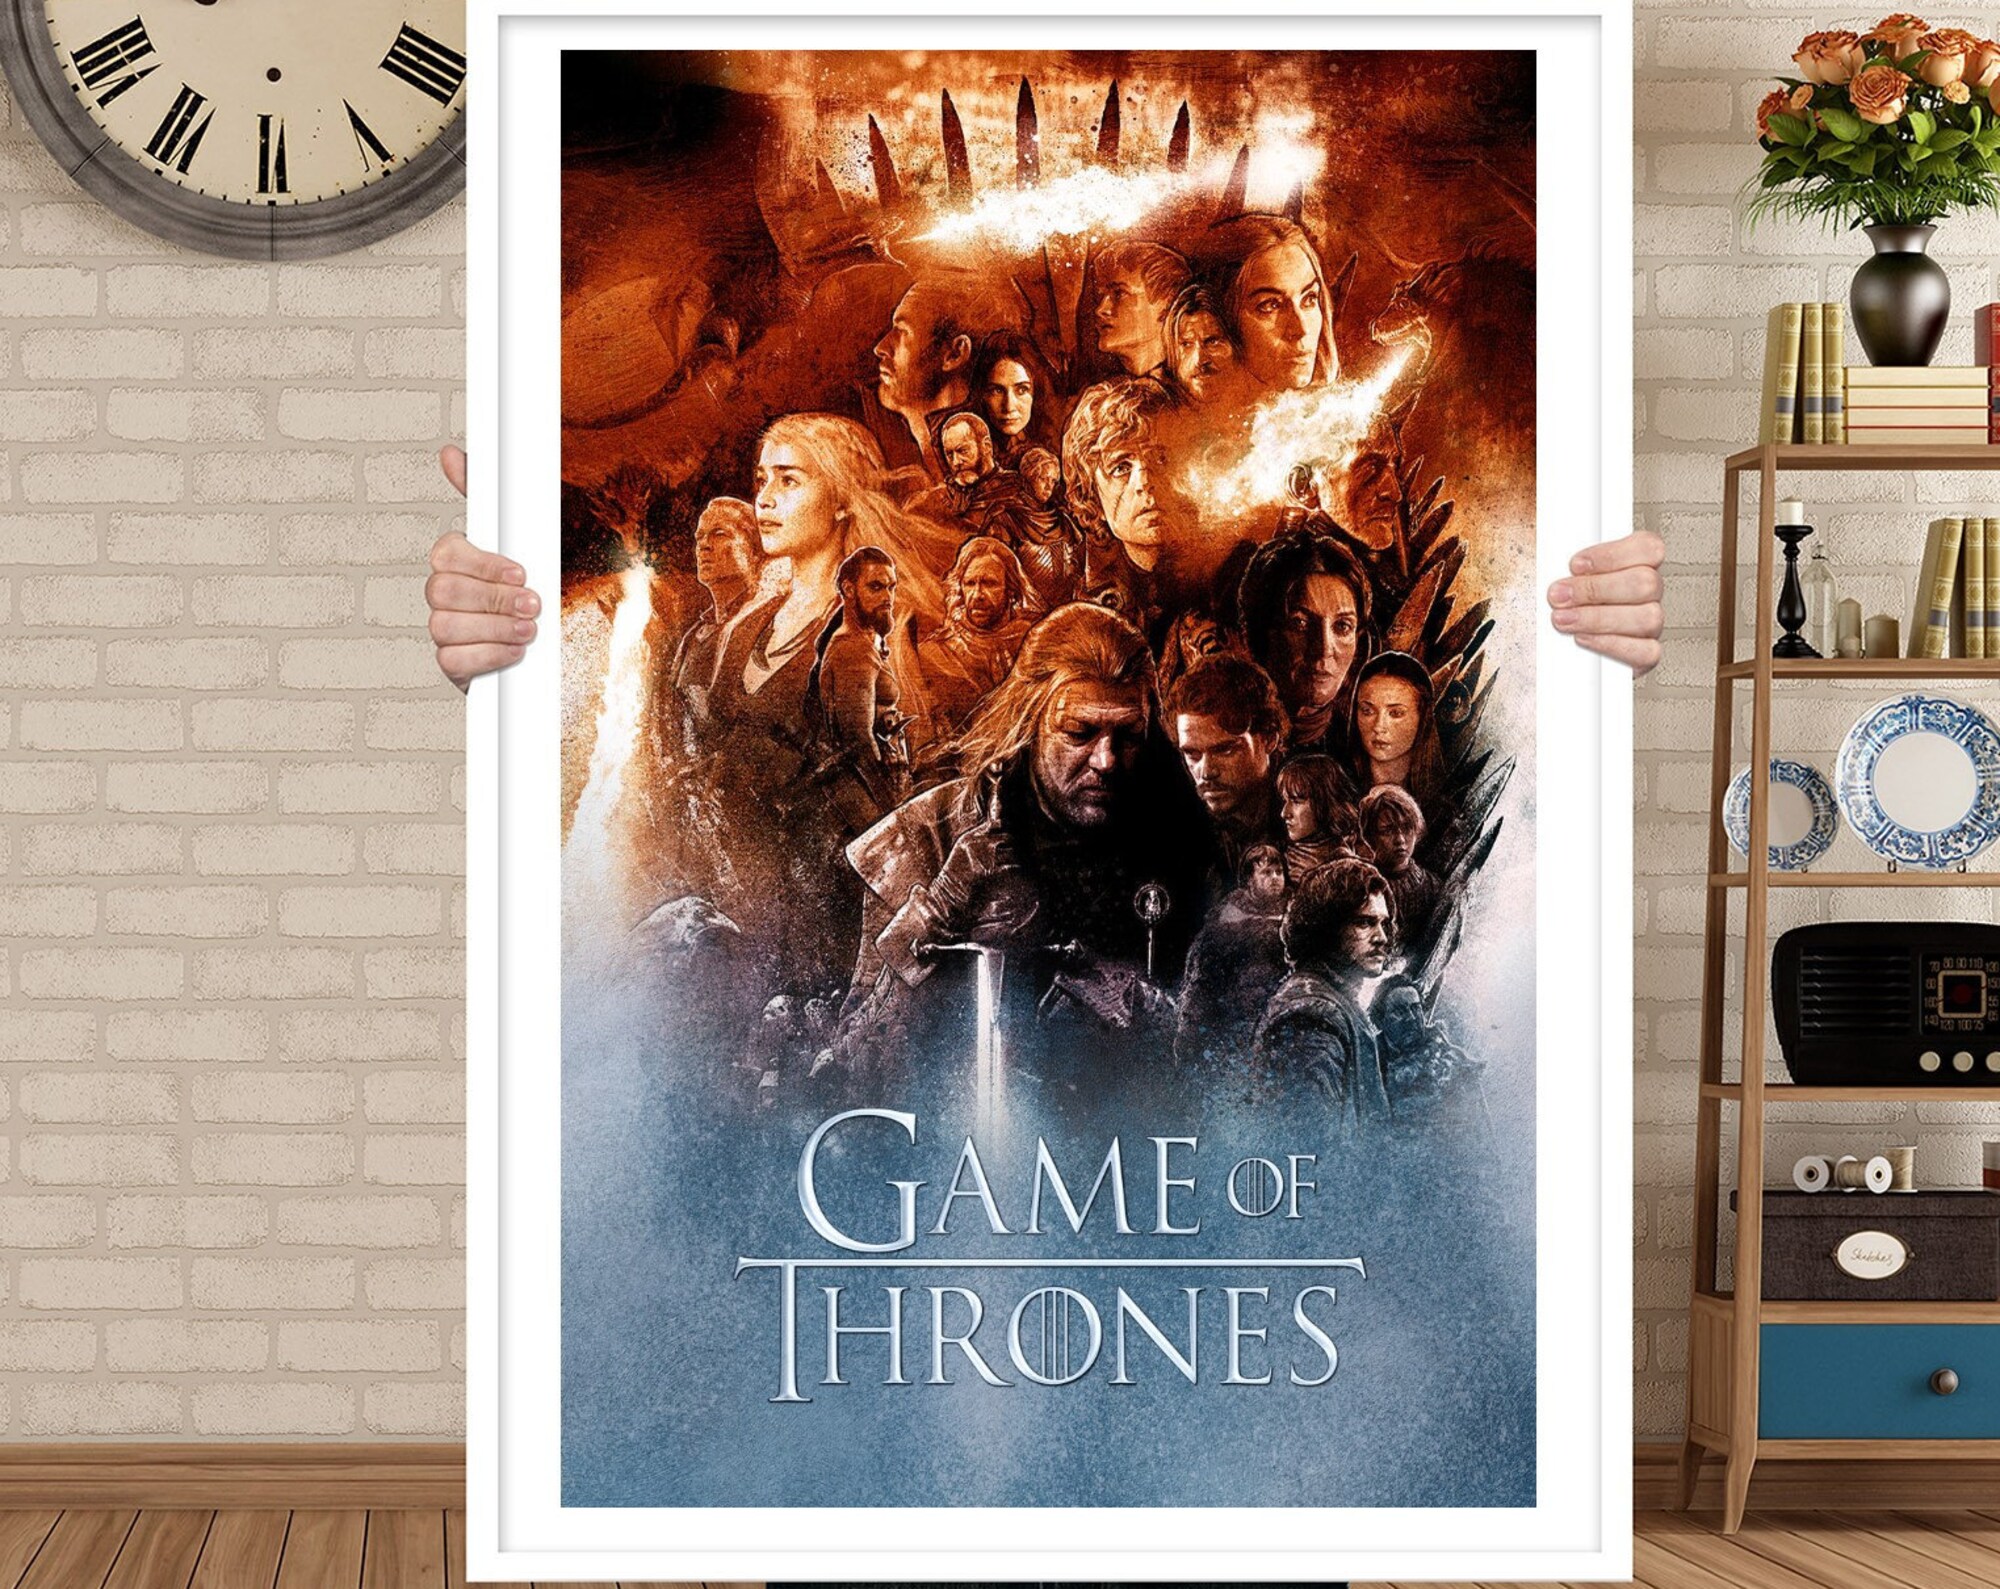 Game of Thrones Poster - Movie Poster Art Home Decor Bedroom Poster